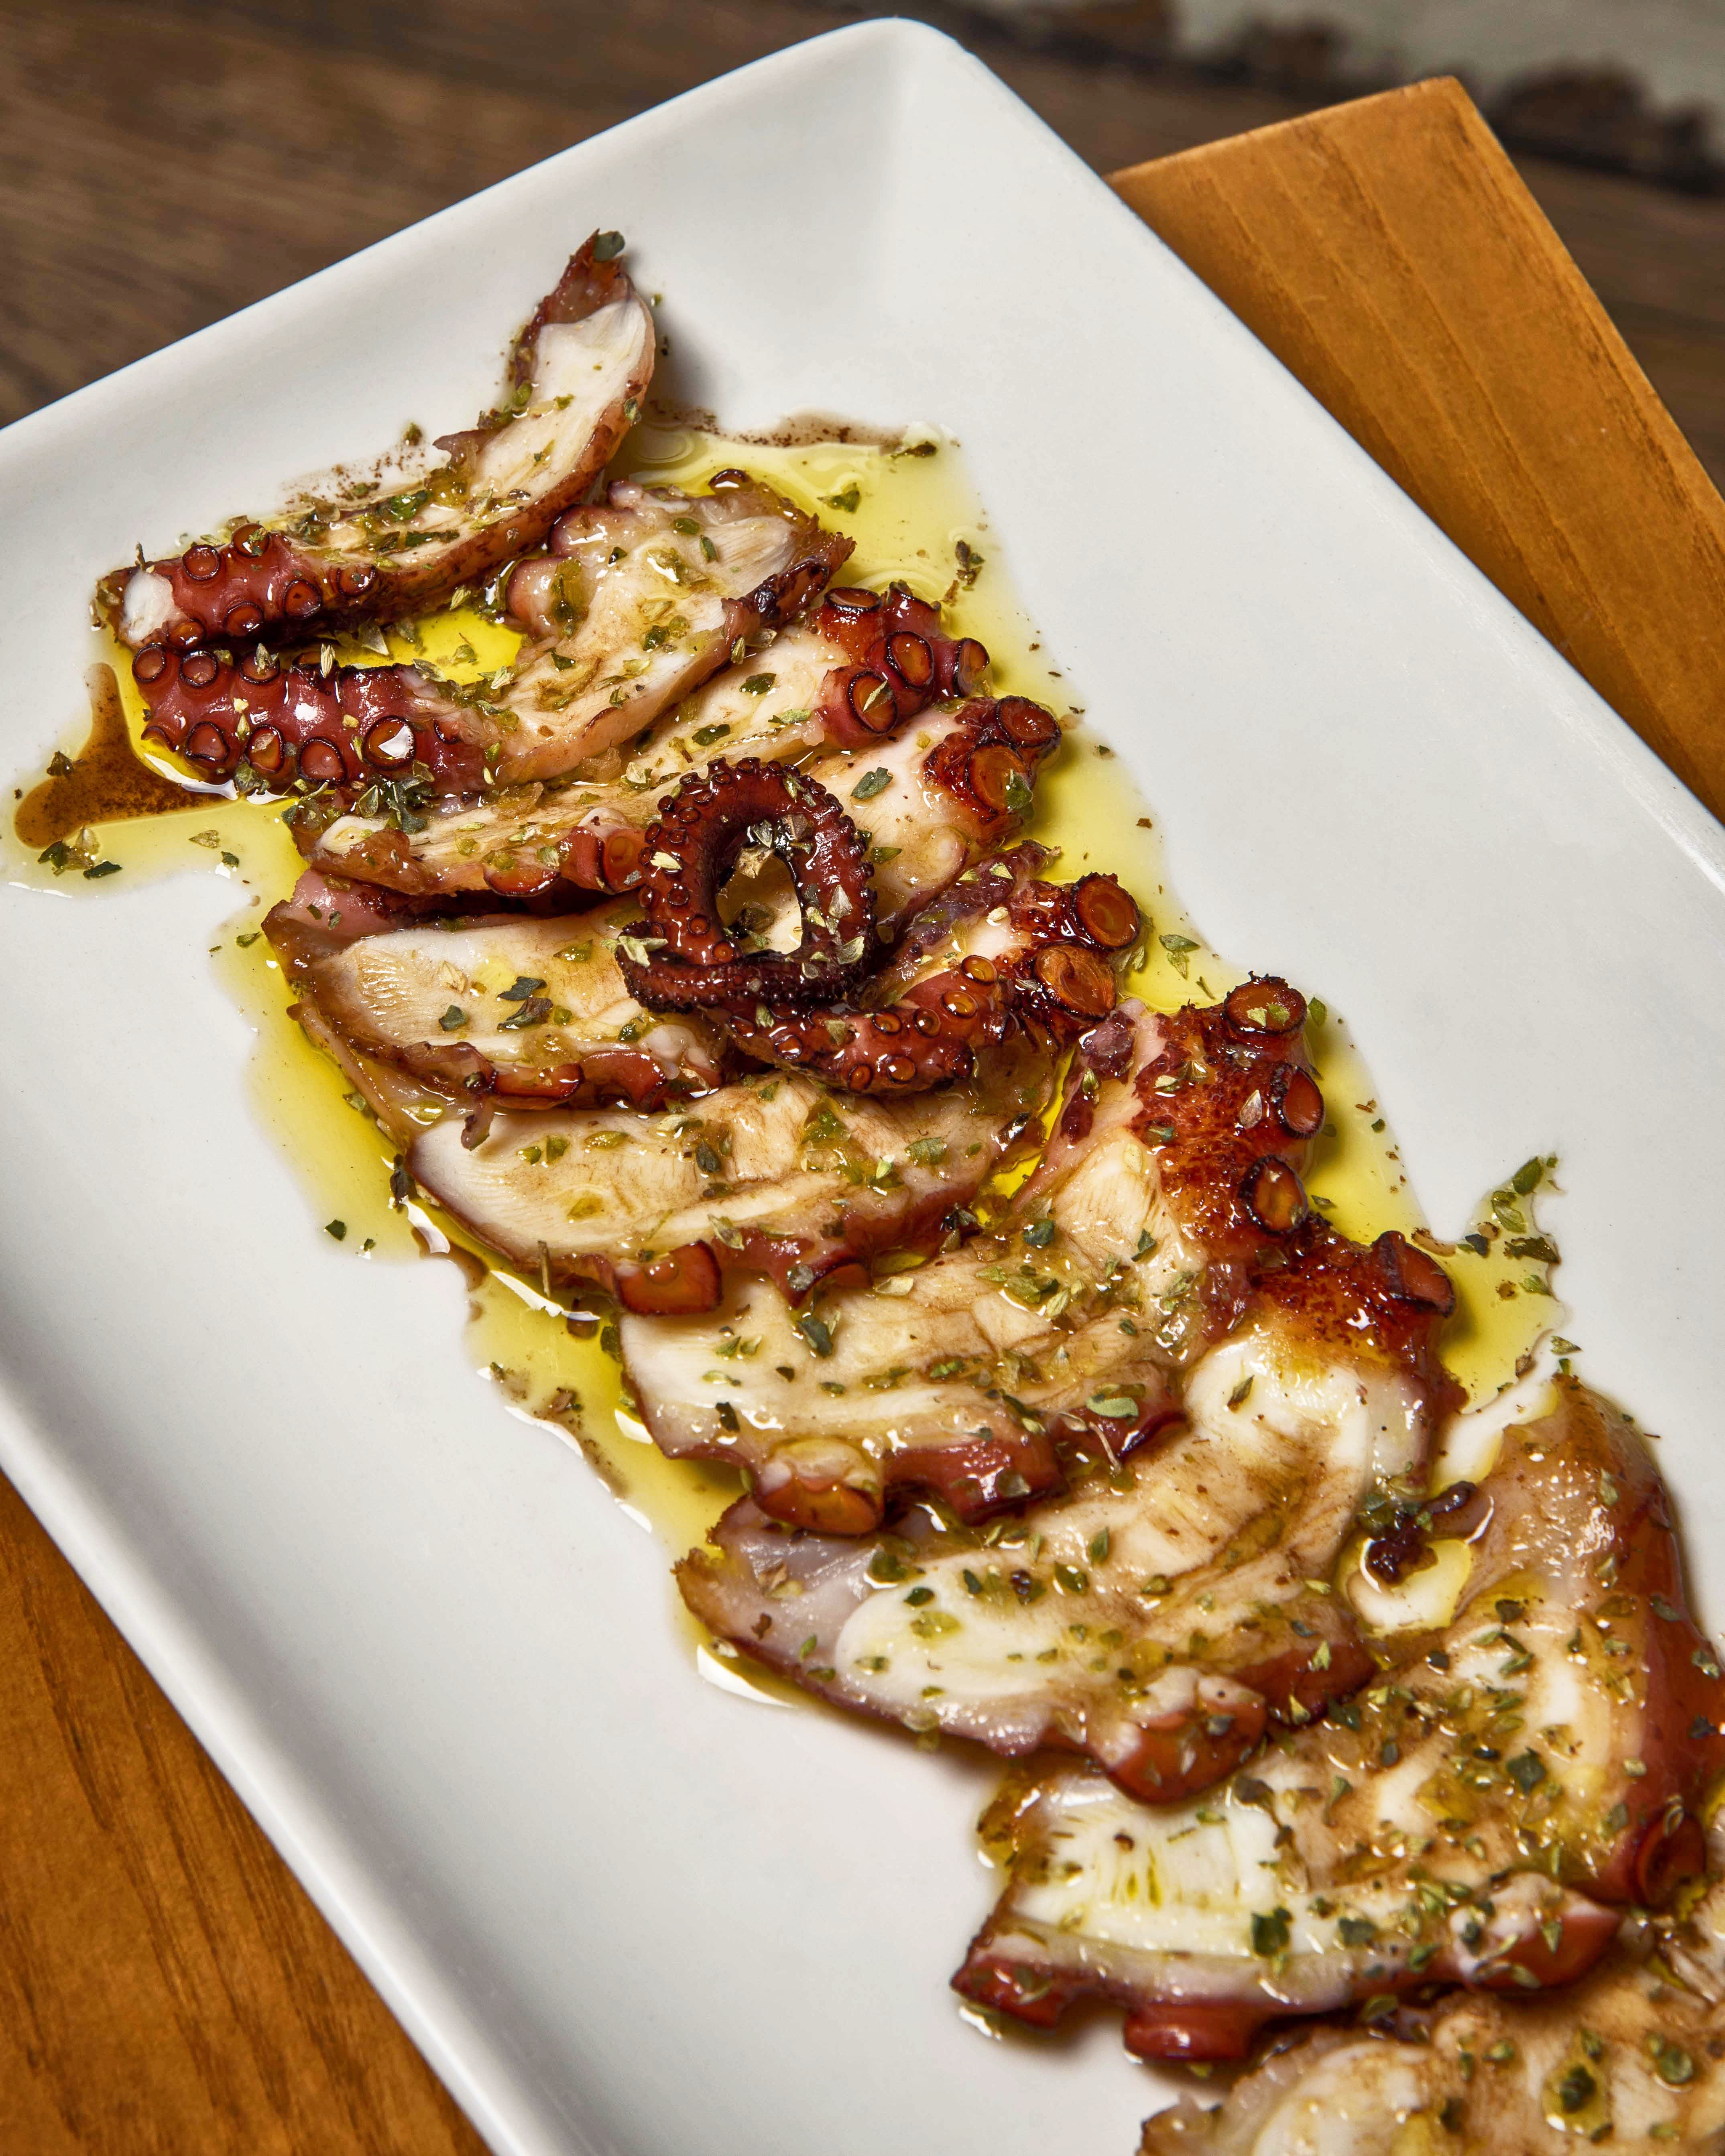 Grilled octopus with extra virgin olive oil and Módena vinegar